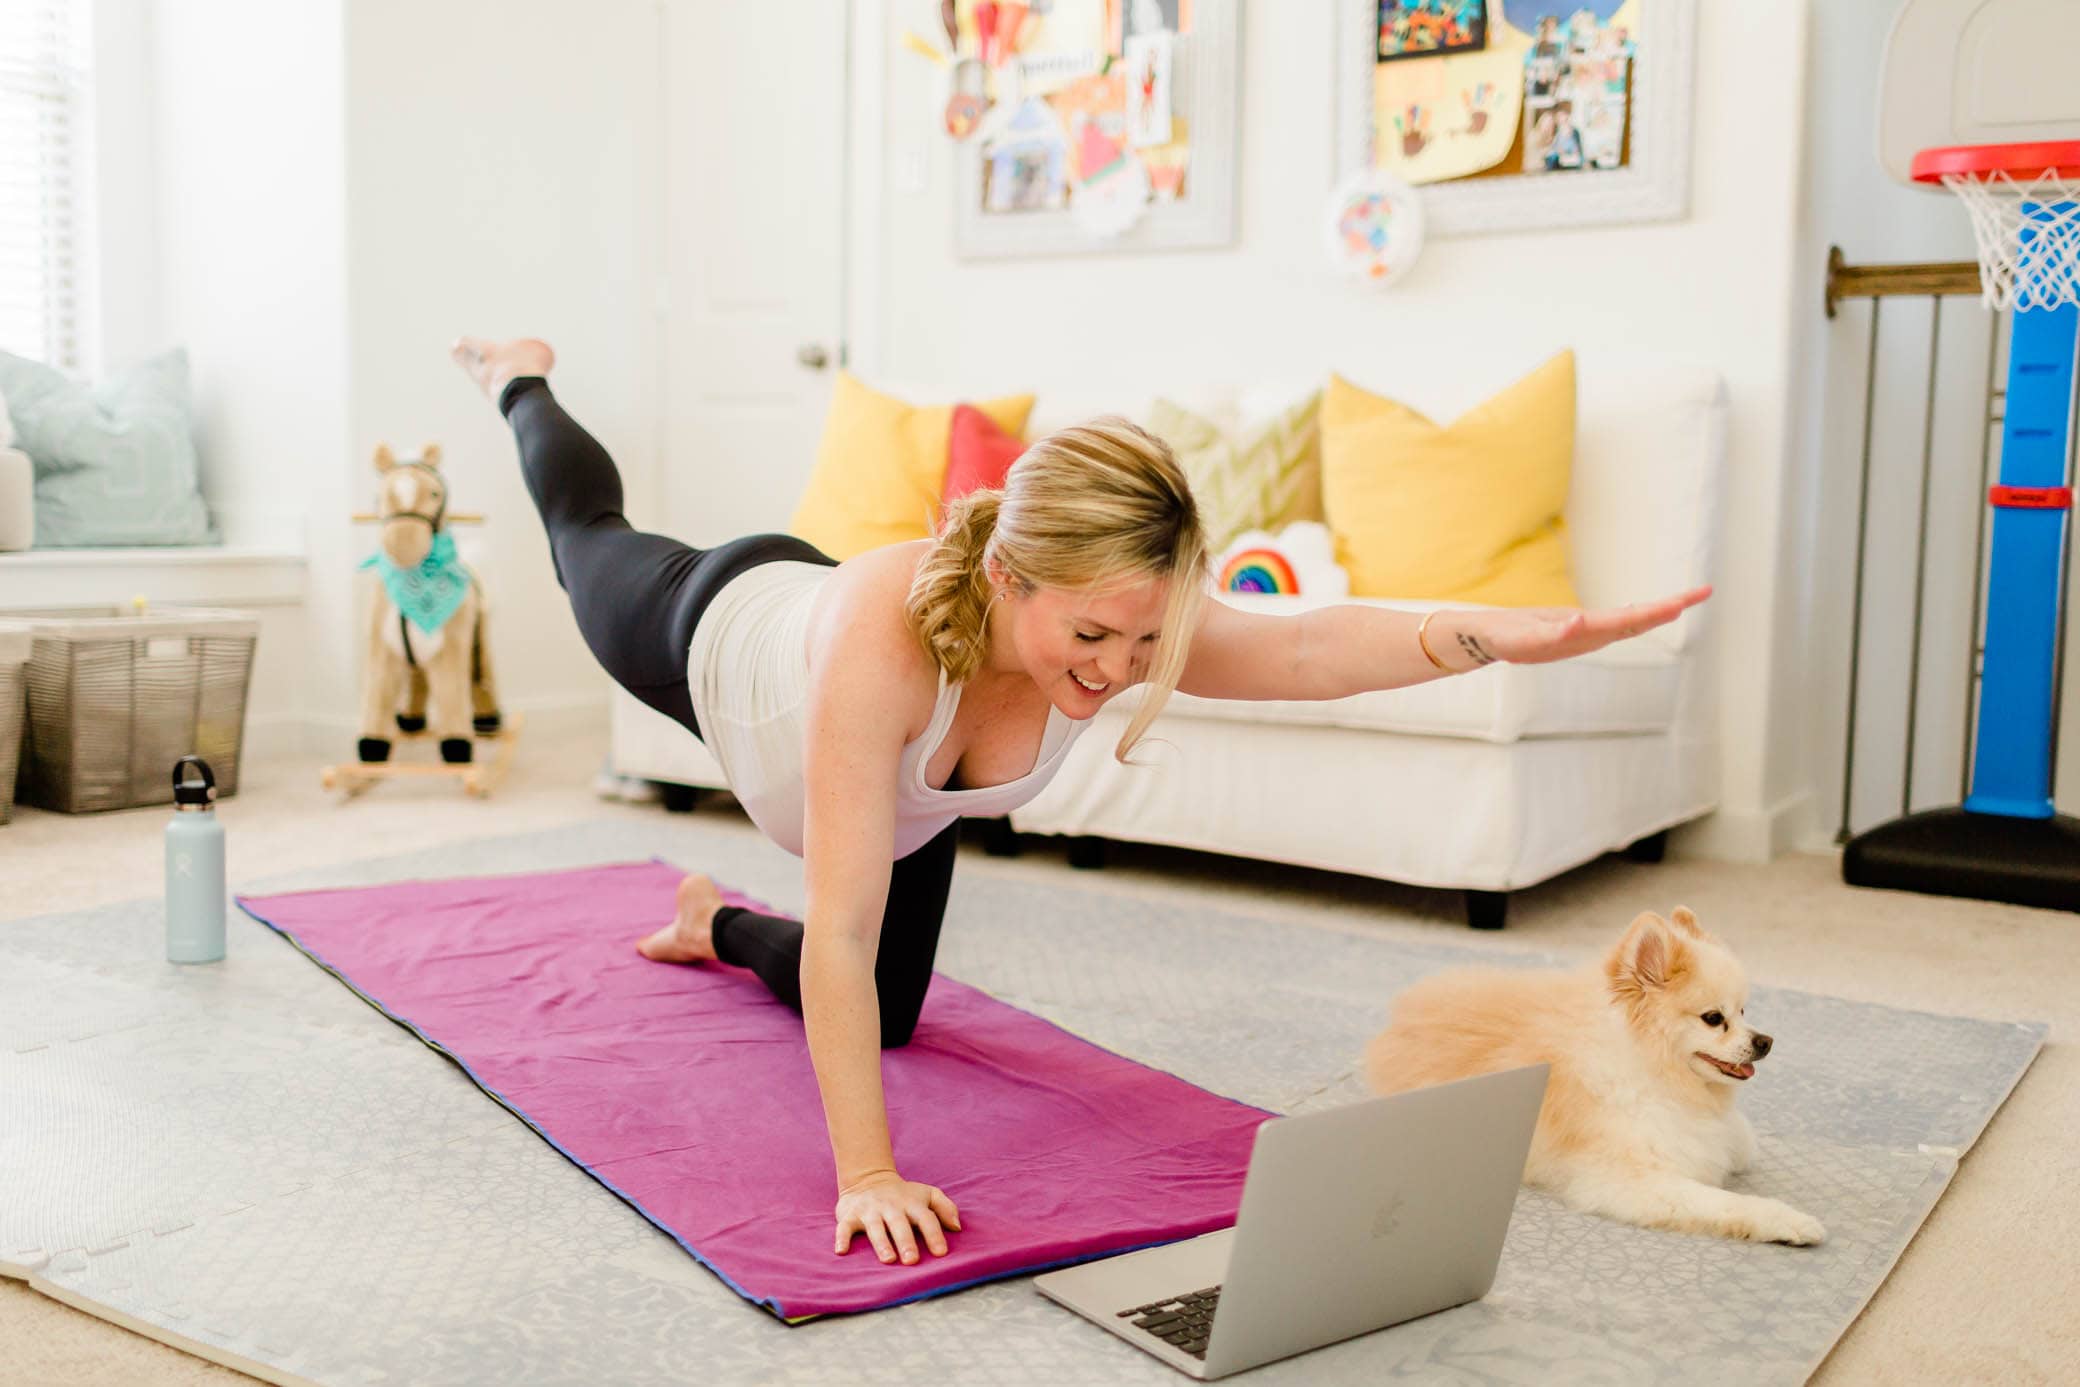 Pregnant woman on her yoga mat looking at her laptop doing a workout in her kids' playroom.